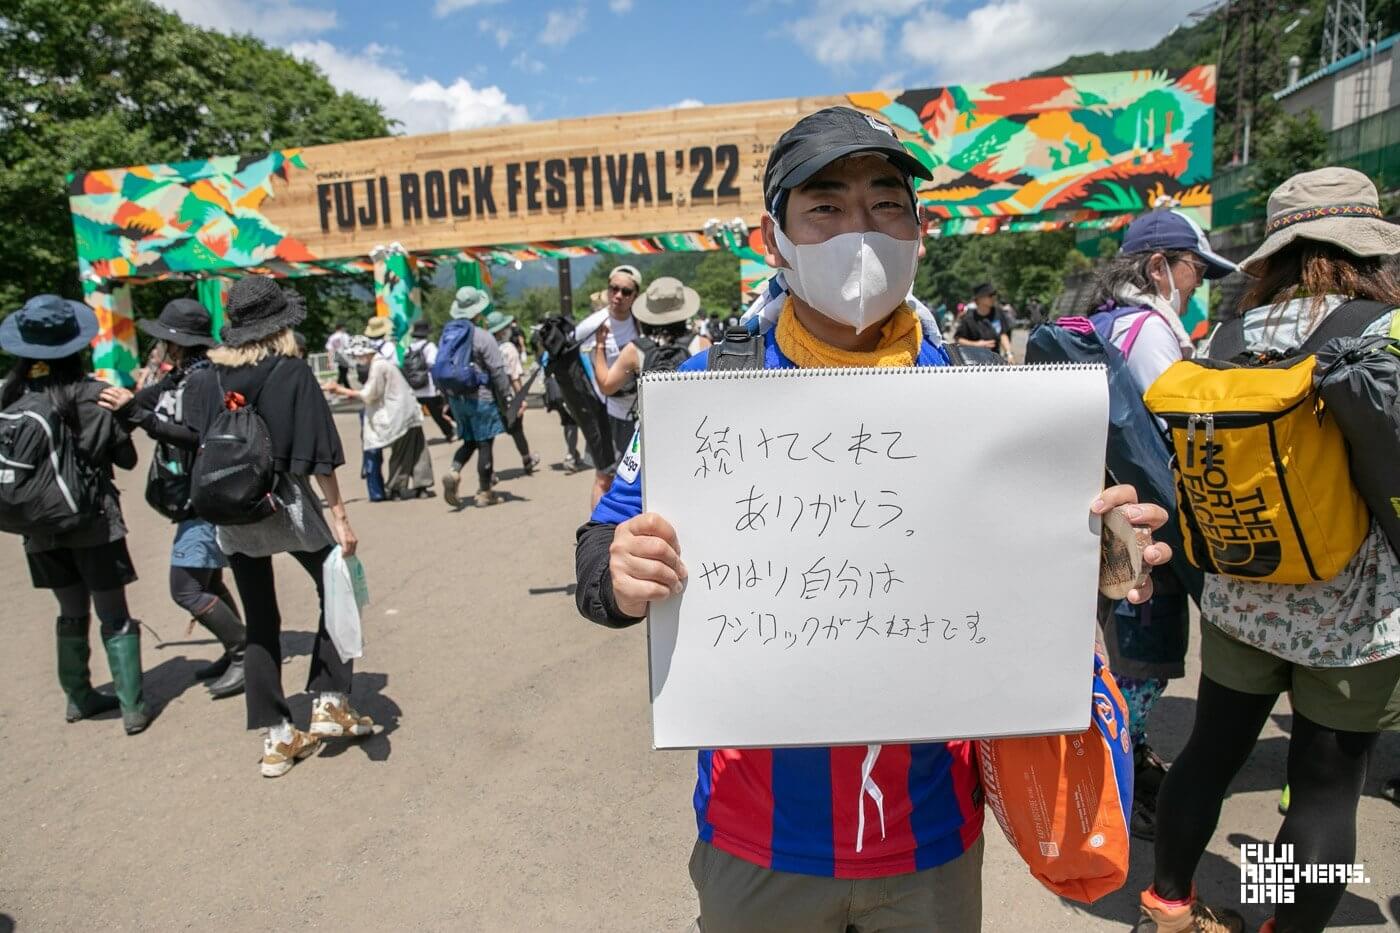 Message For FUJI ROCK19